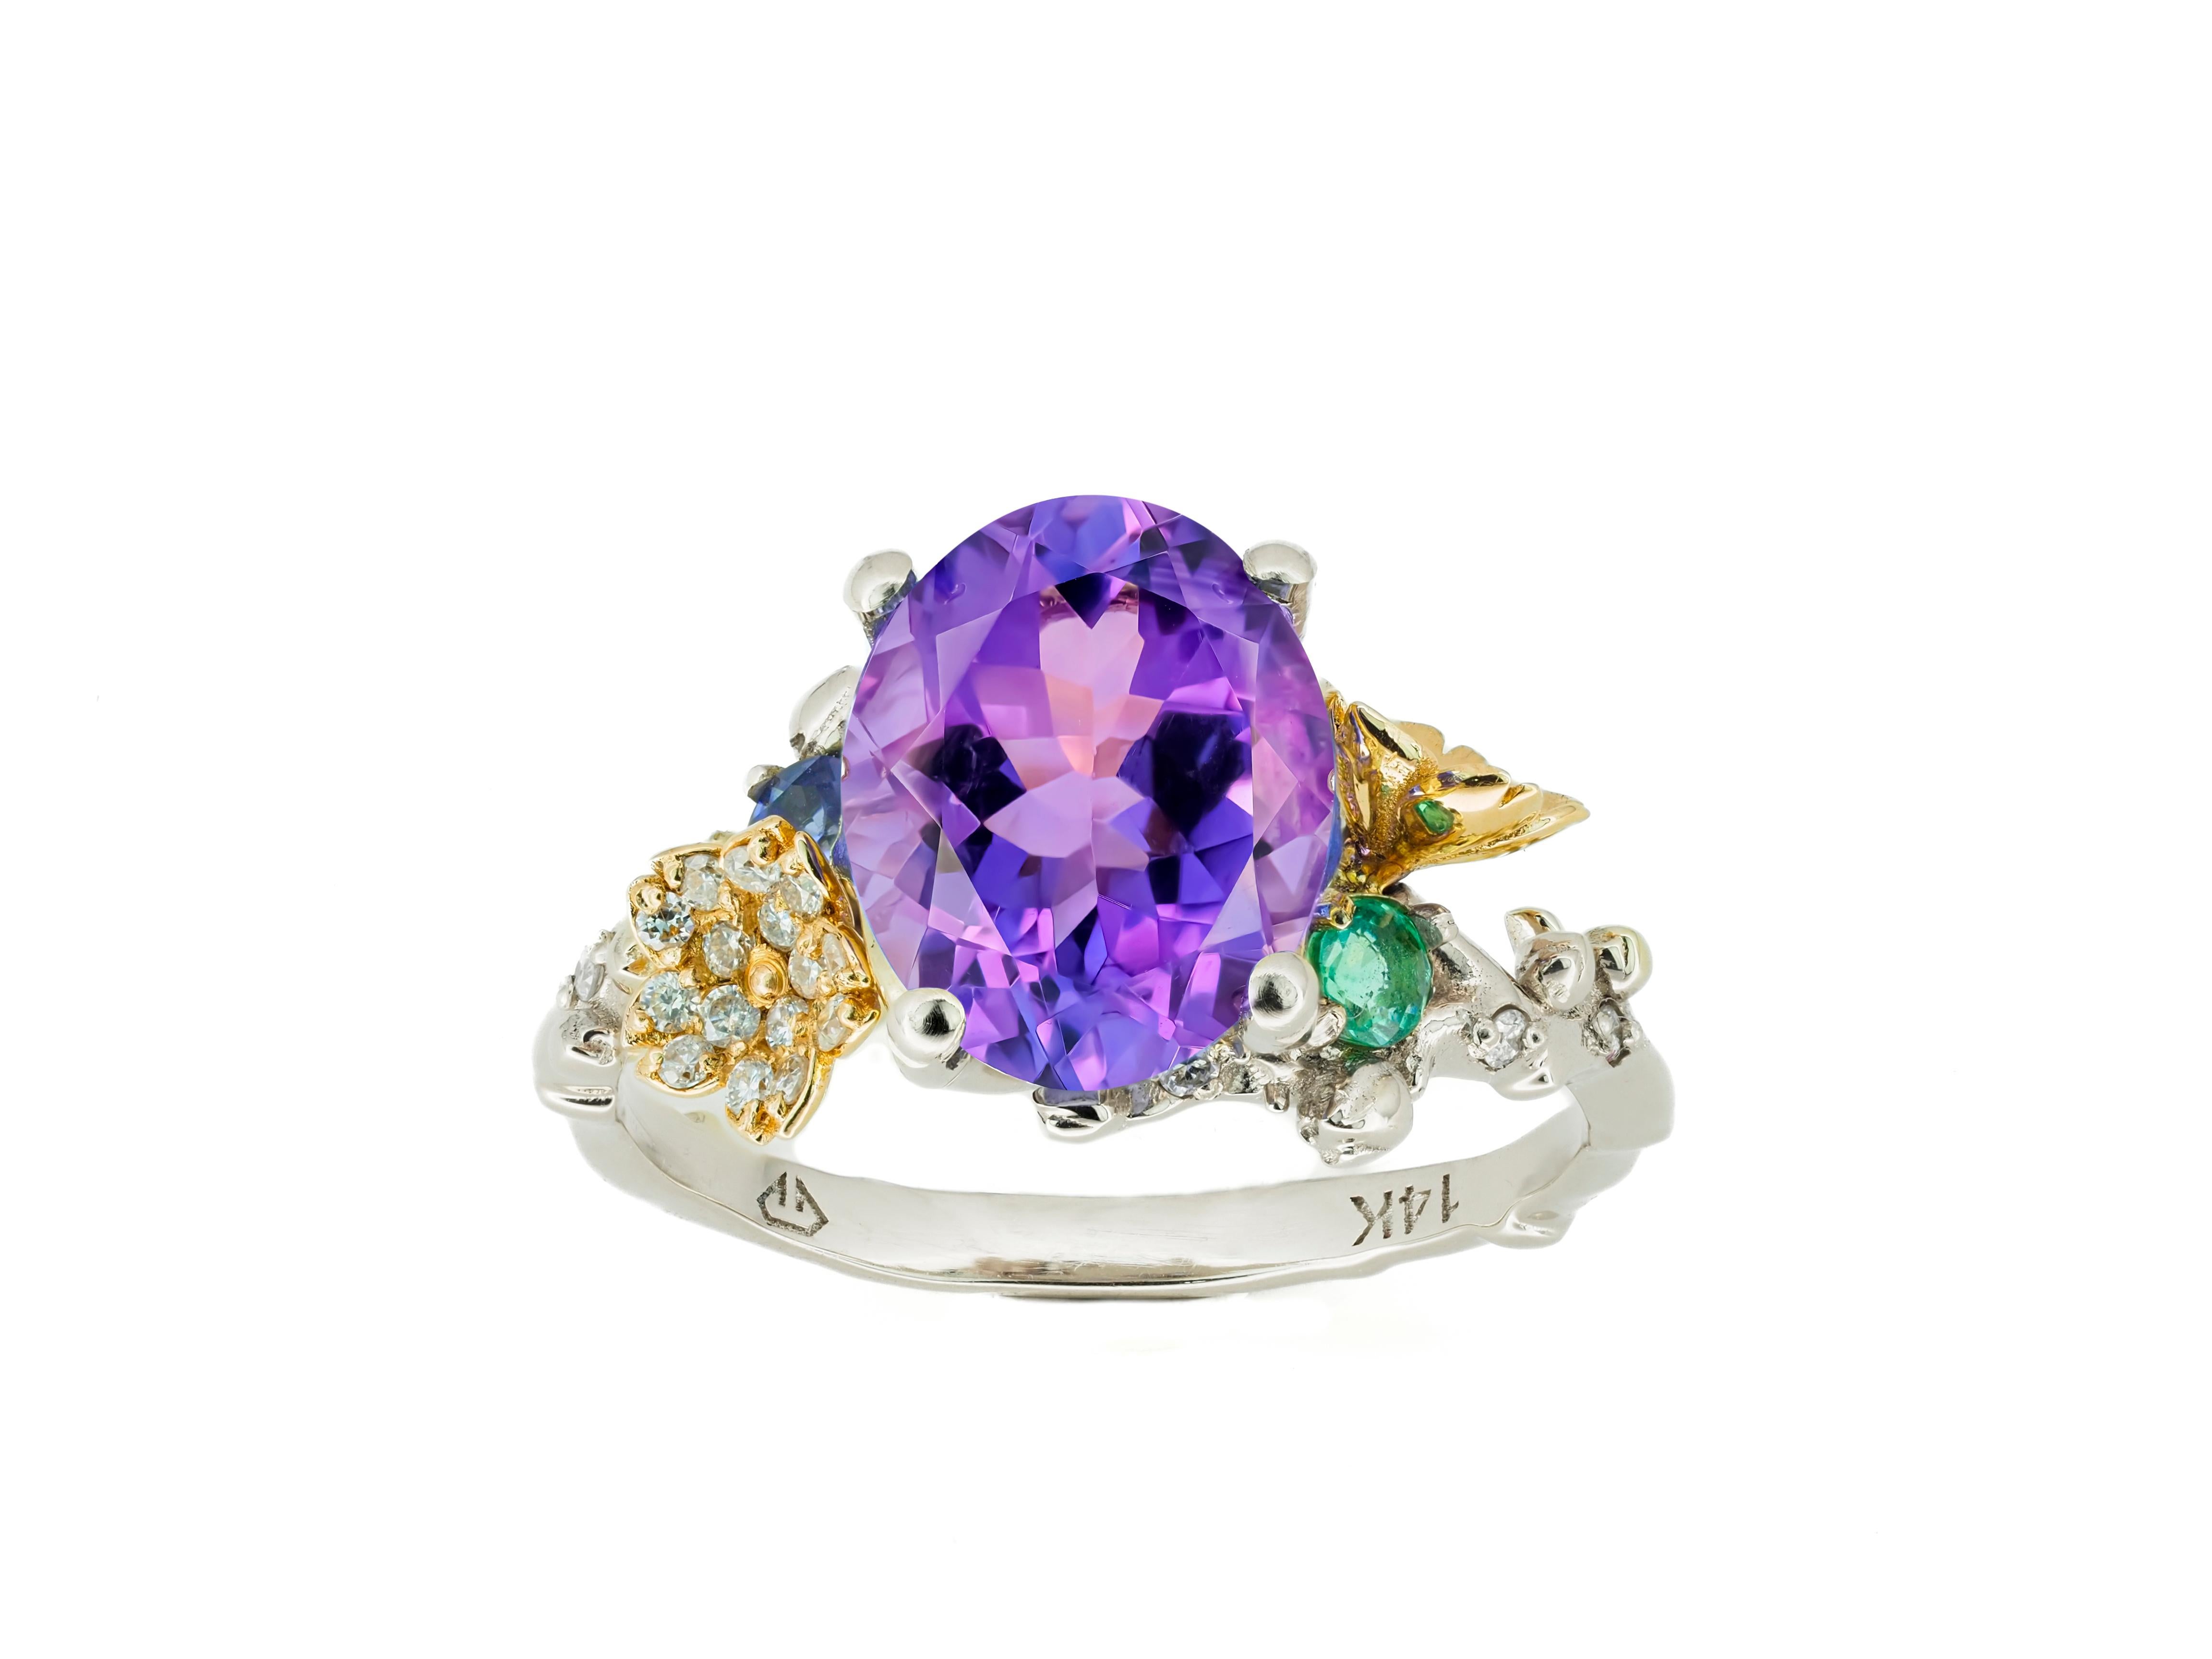 Amethyst 14k gold ring. 
Genuine Amethyst ring. Amethyst gold ring. Oval Amethyst ring. Amethyst, diamonds, emerald 14k gold ring.

Metal: 14k gold : yellow and white.
Weight: 3.85 gr depends from size

Central stone natural Amethyst
Weight: approx